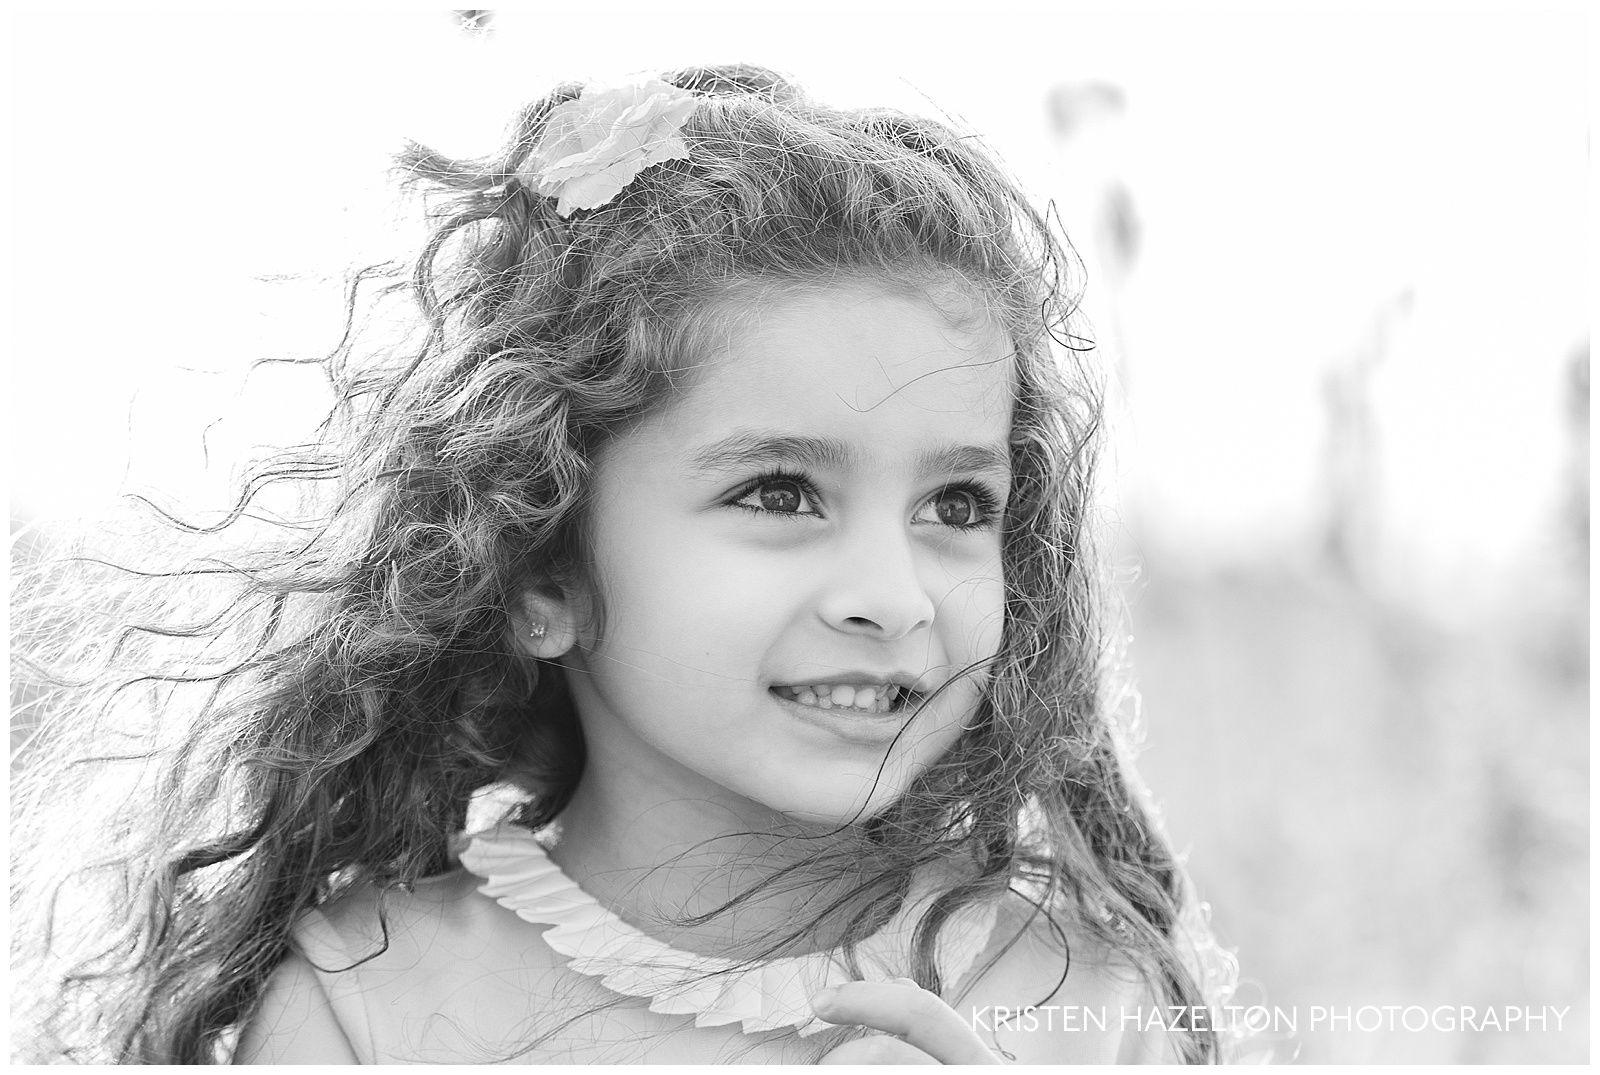 Closeup black and white portrait of a young girl